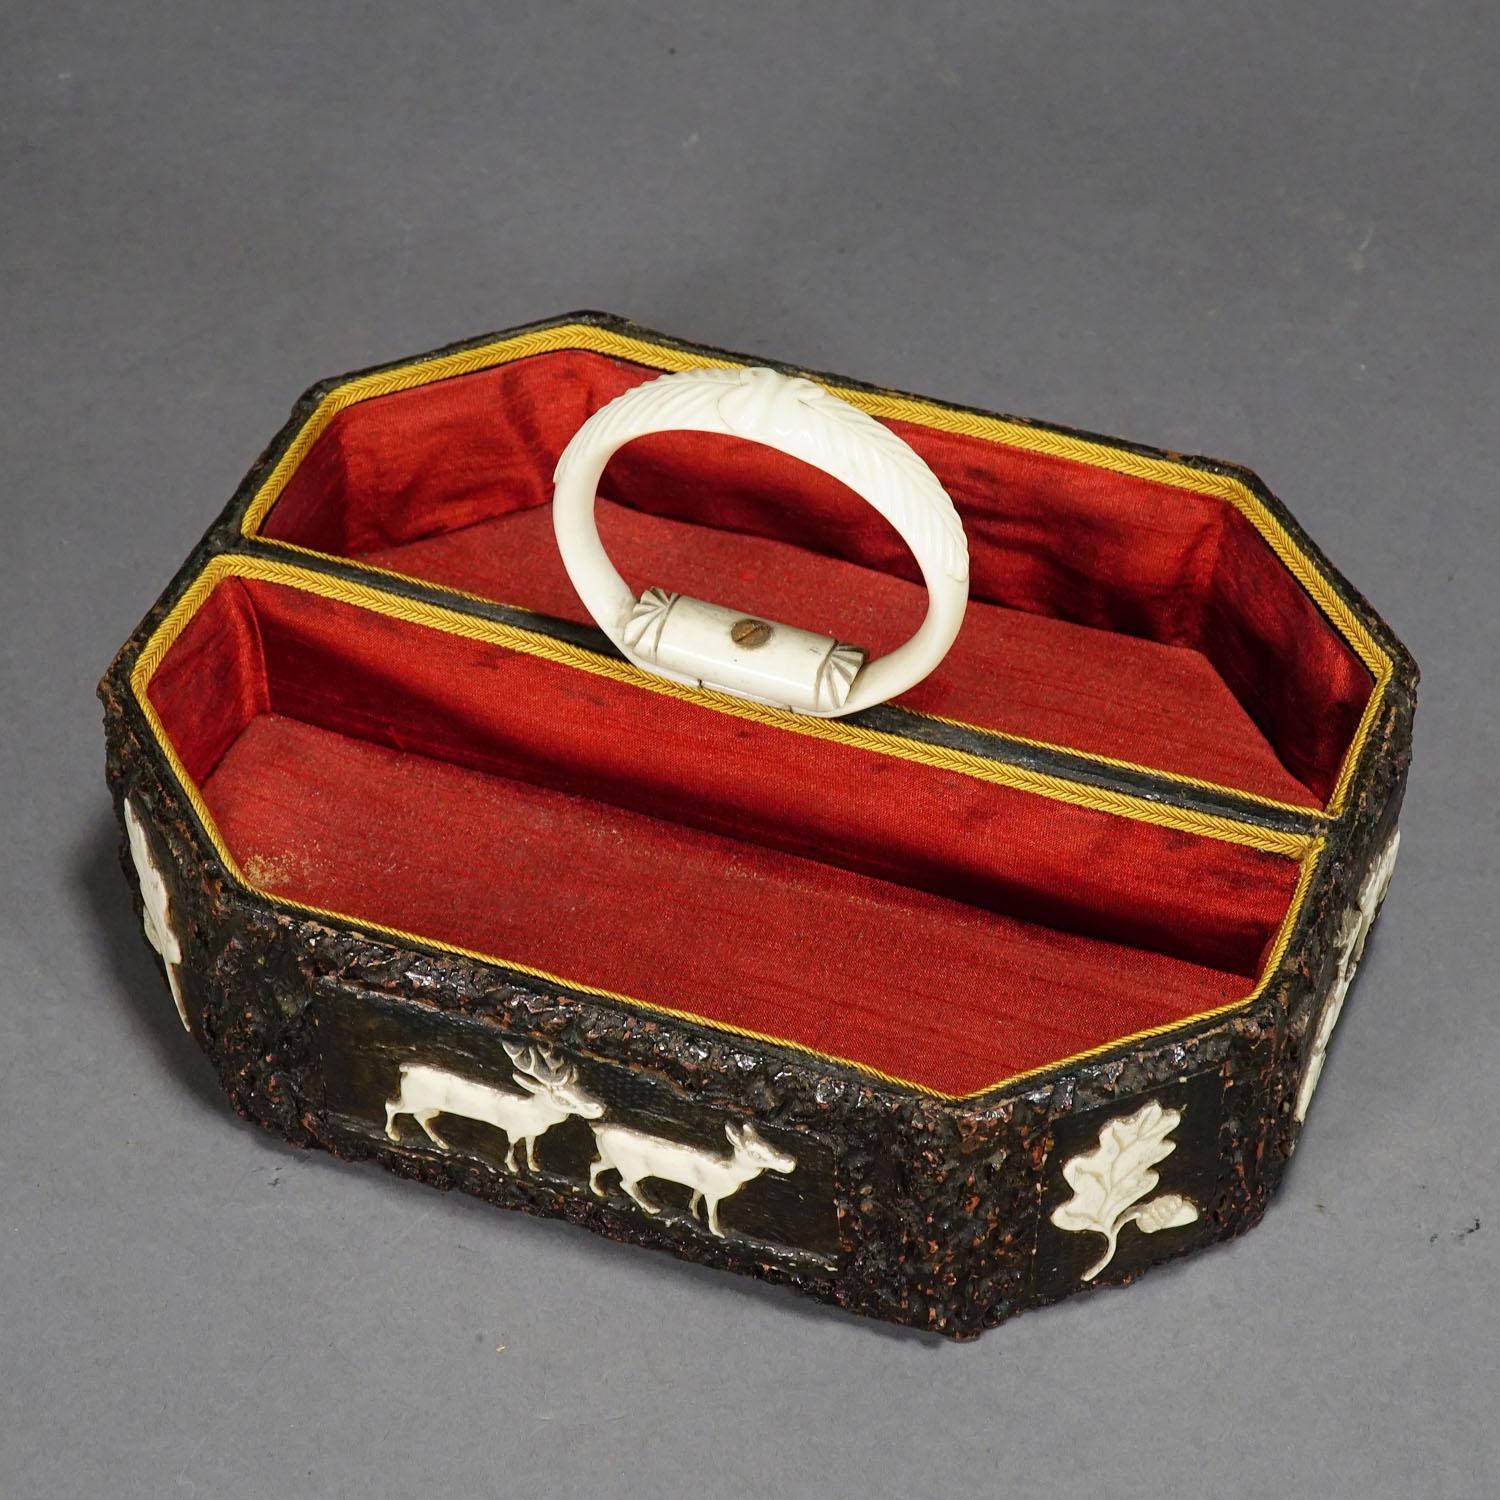 19th Century Antique Black Forest Basket with Carved Horn Plaques, ca. 1860